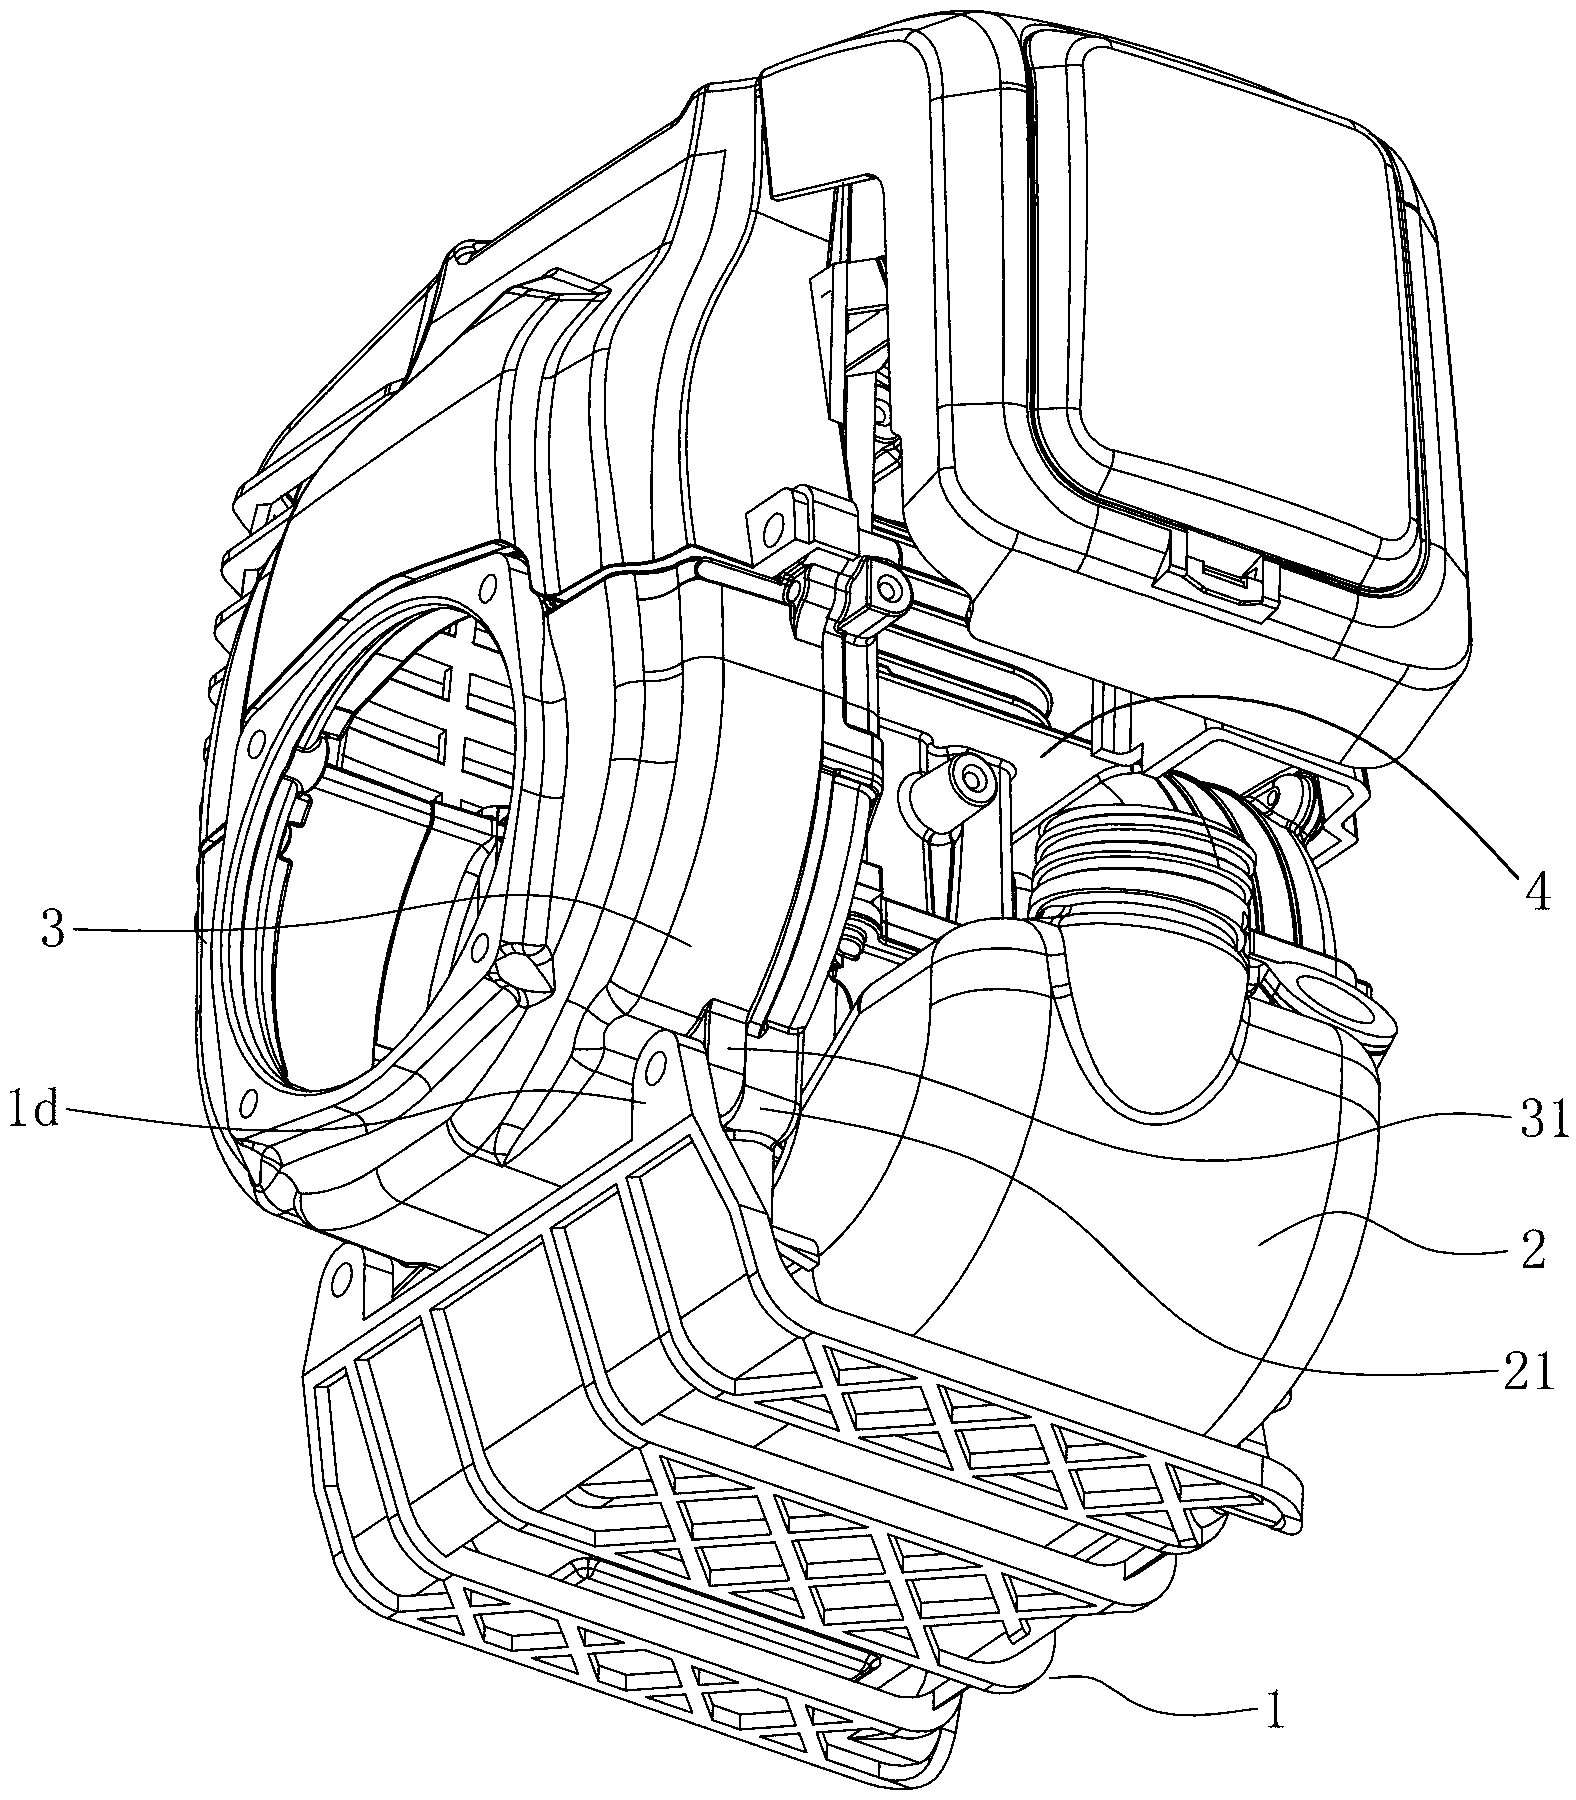 Petrol engine with underneath type oil tank